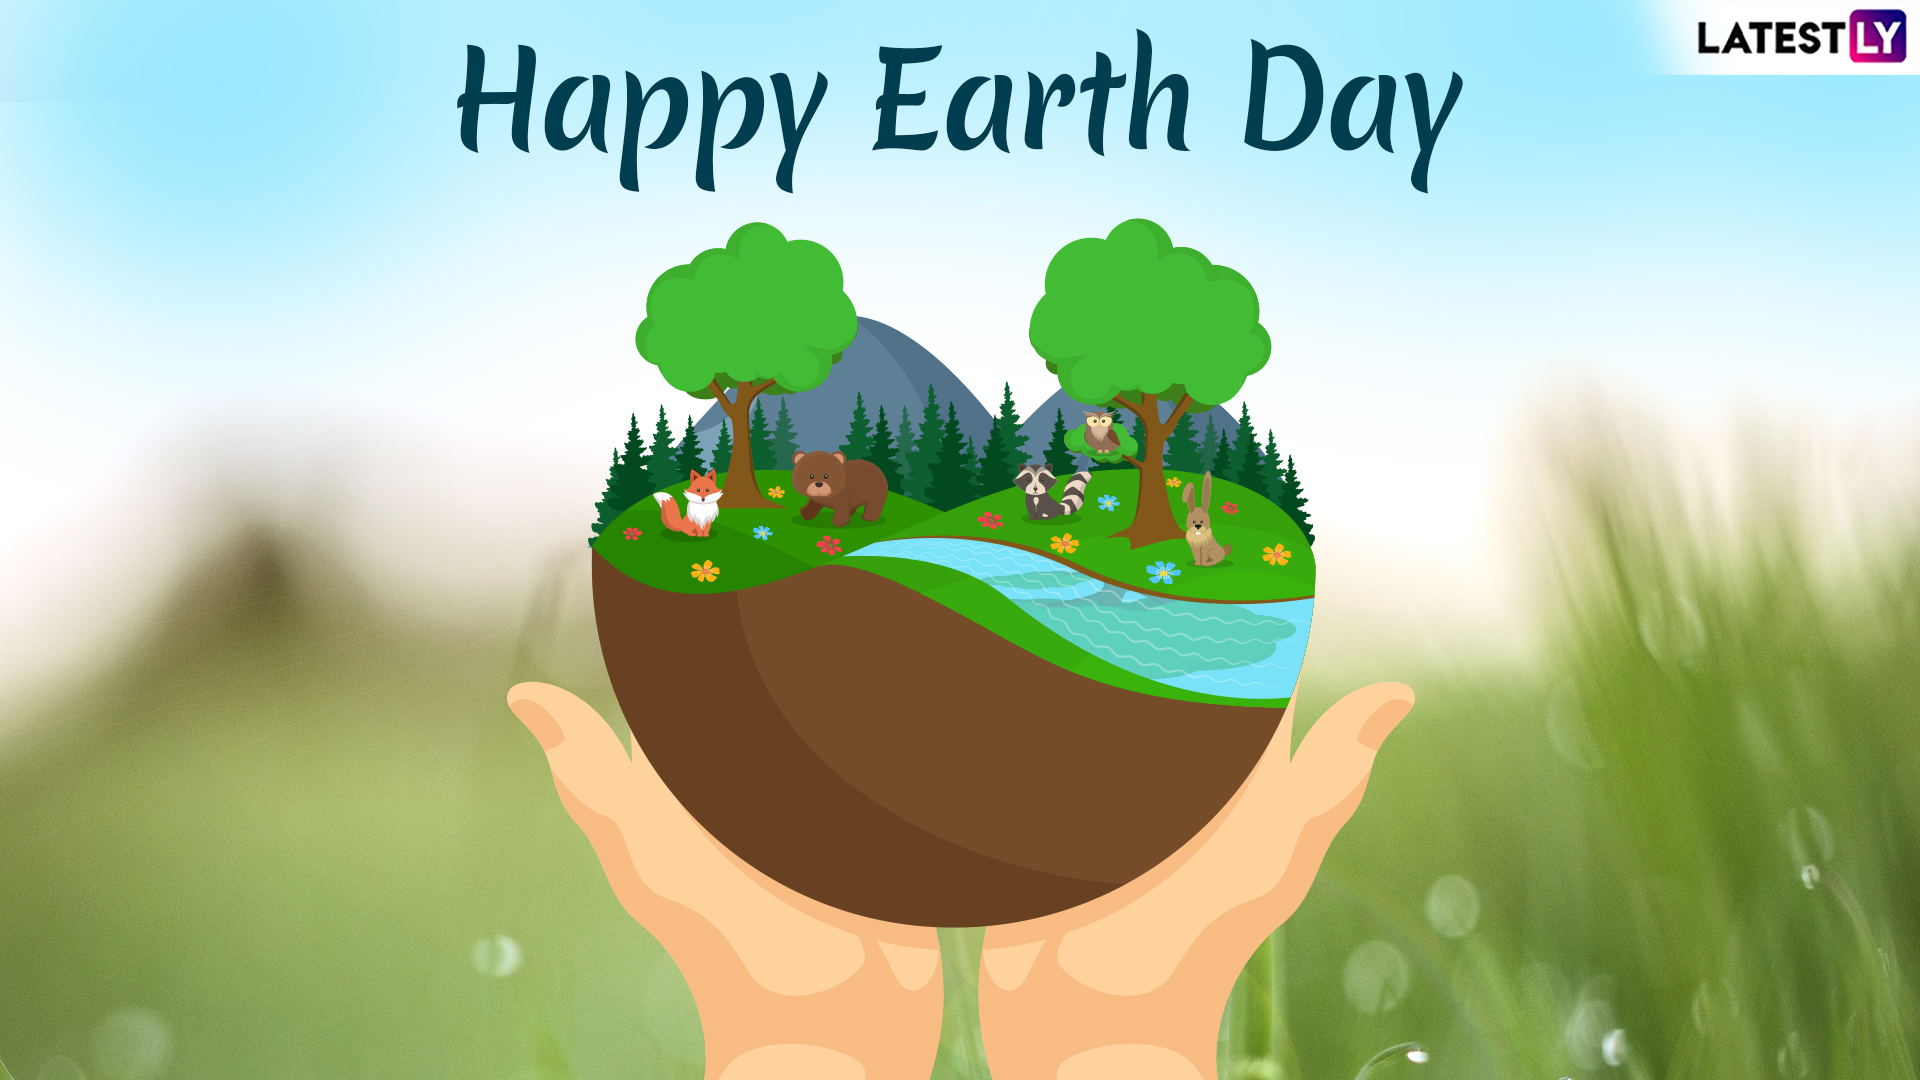 Earth Day Image HD Wallpaper For Online